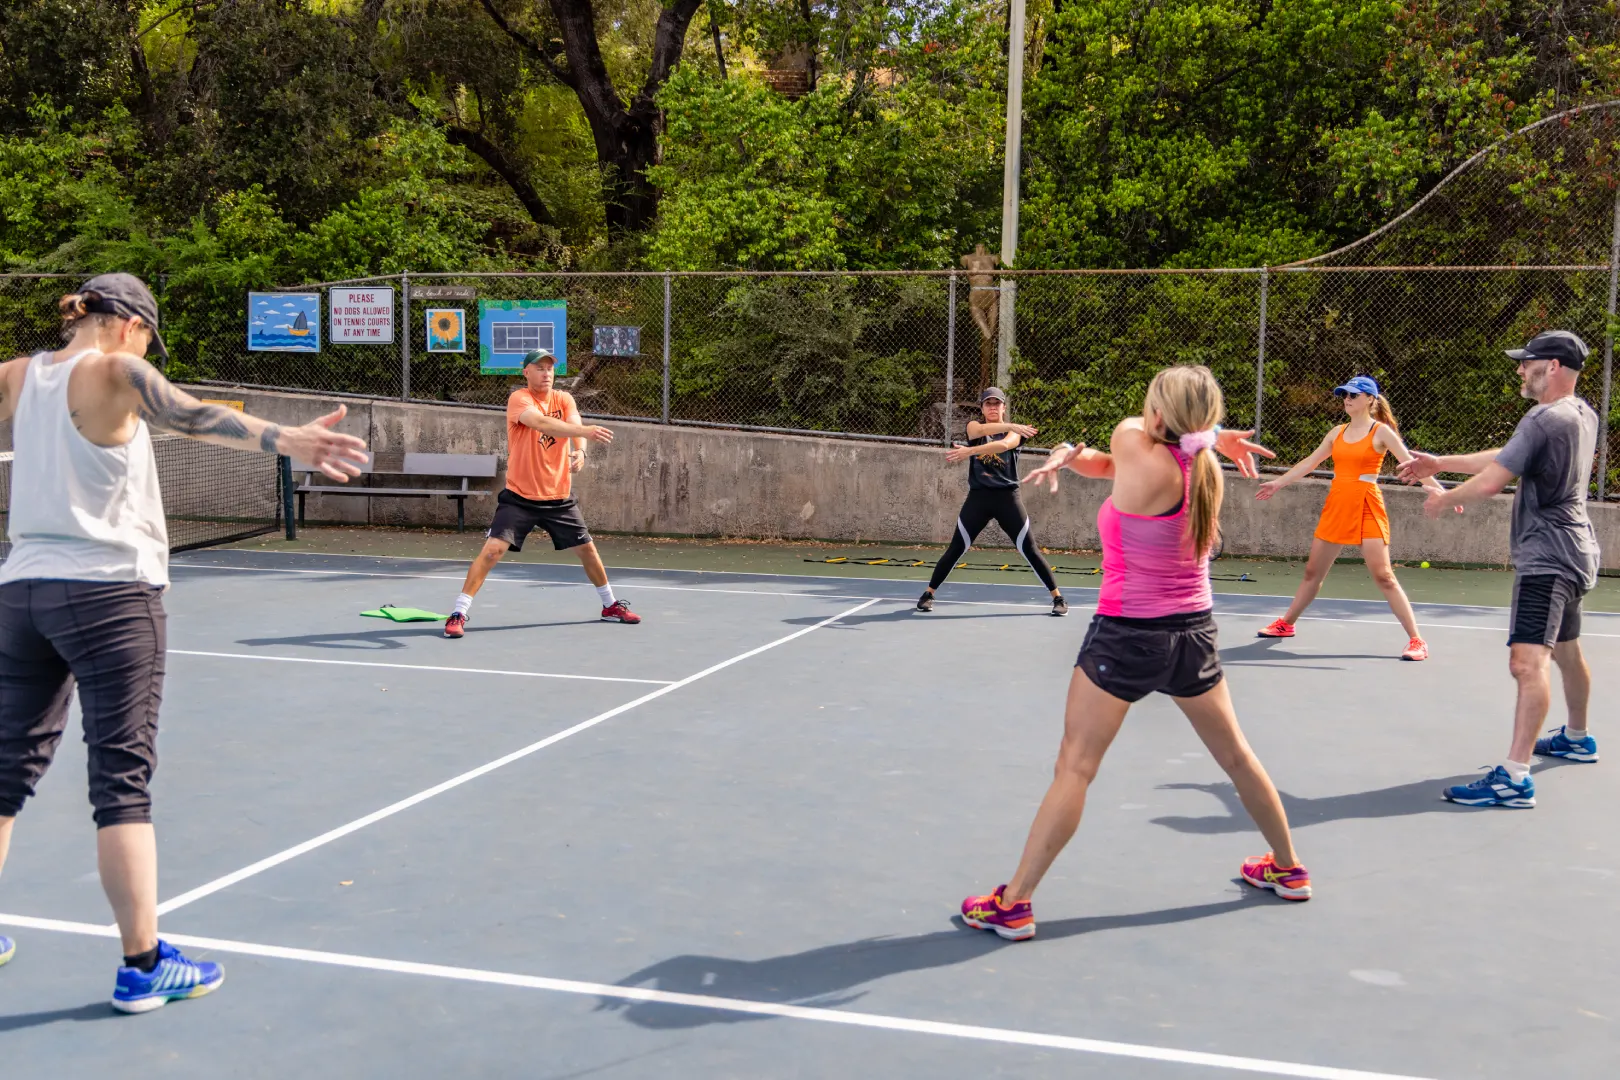 A group of people playing tennis on a court.